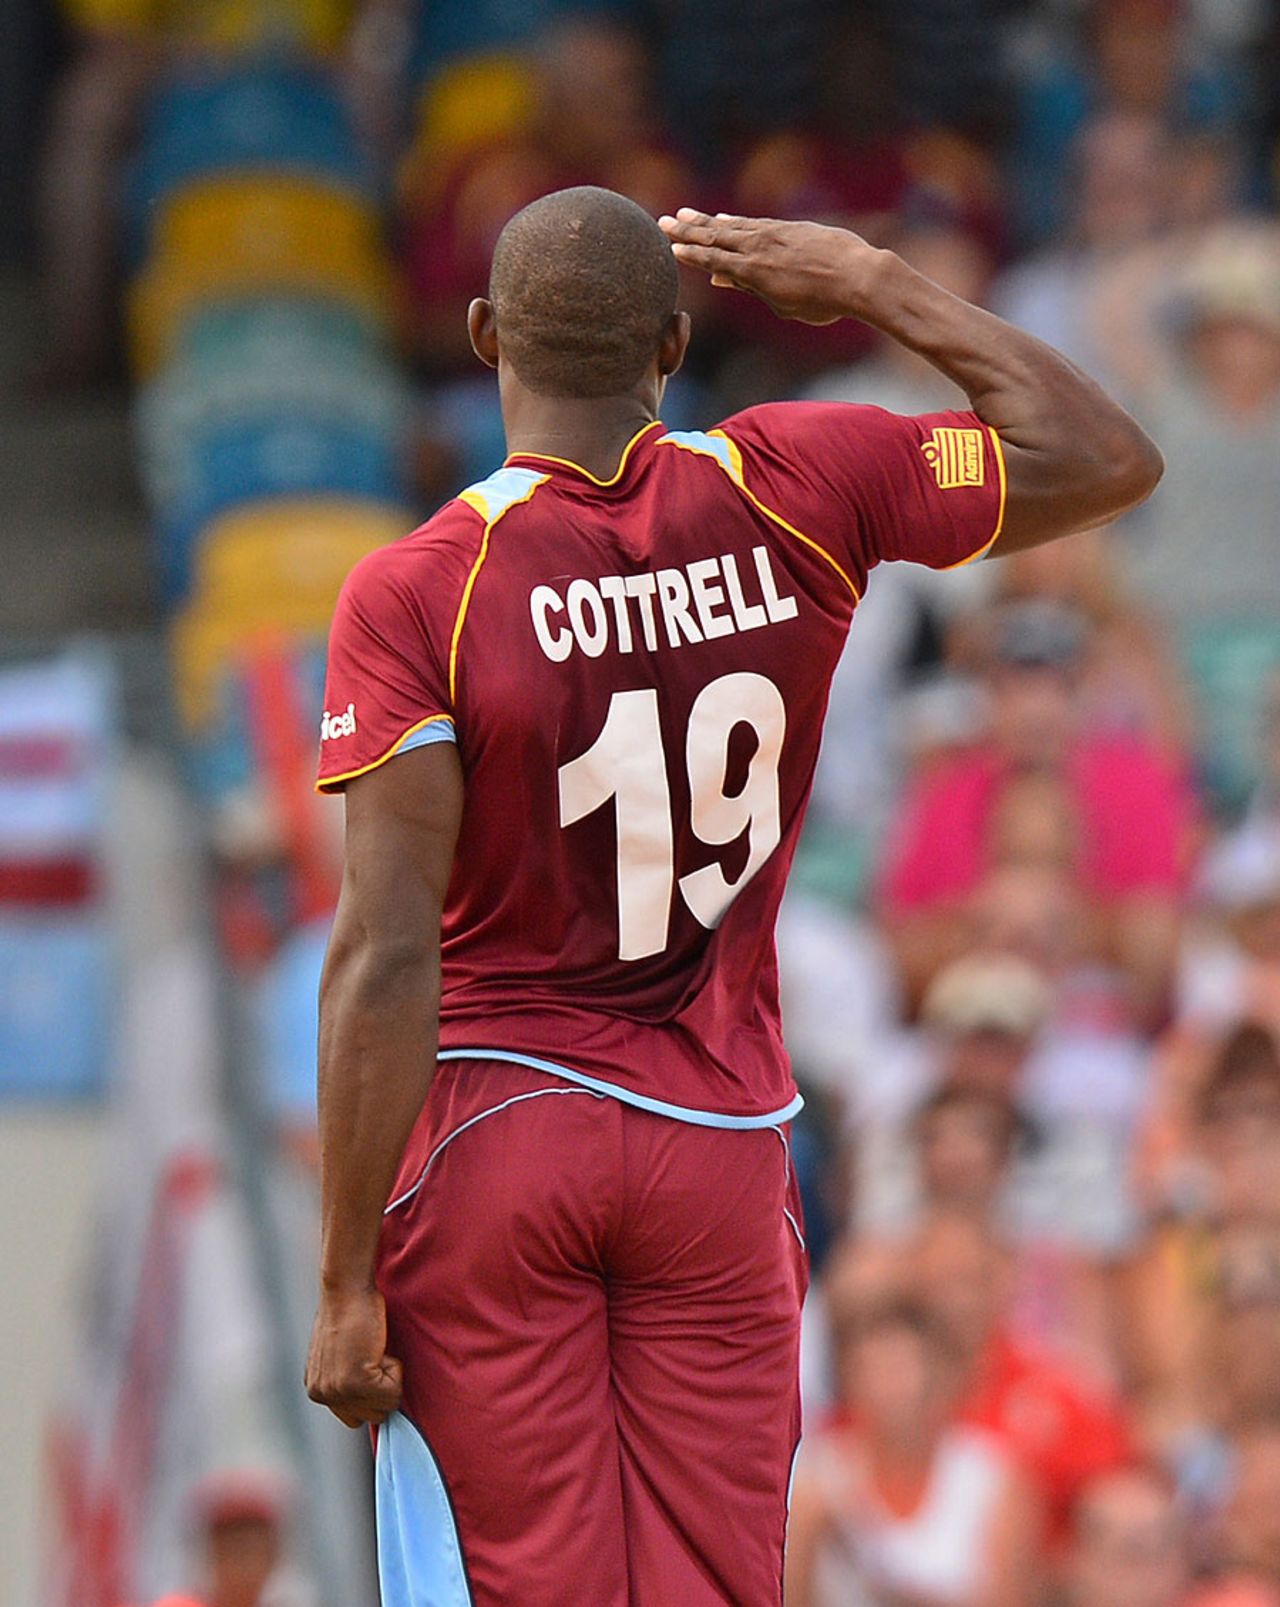 Sheldon Cottrell salutes after taking a wicket, West Indies v England, 3rd T20, Barbados, March 13, 2014